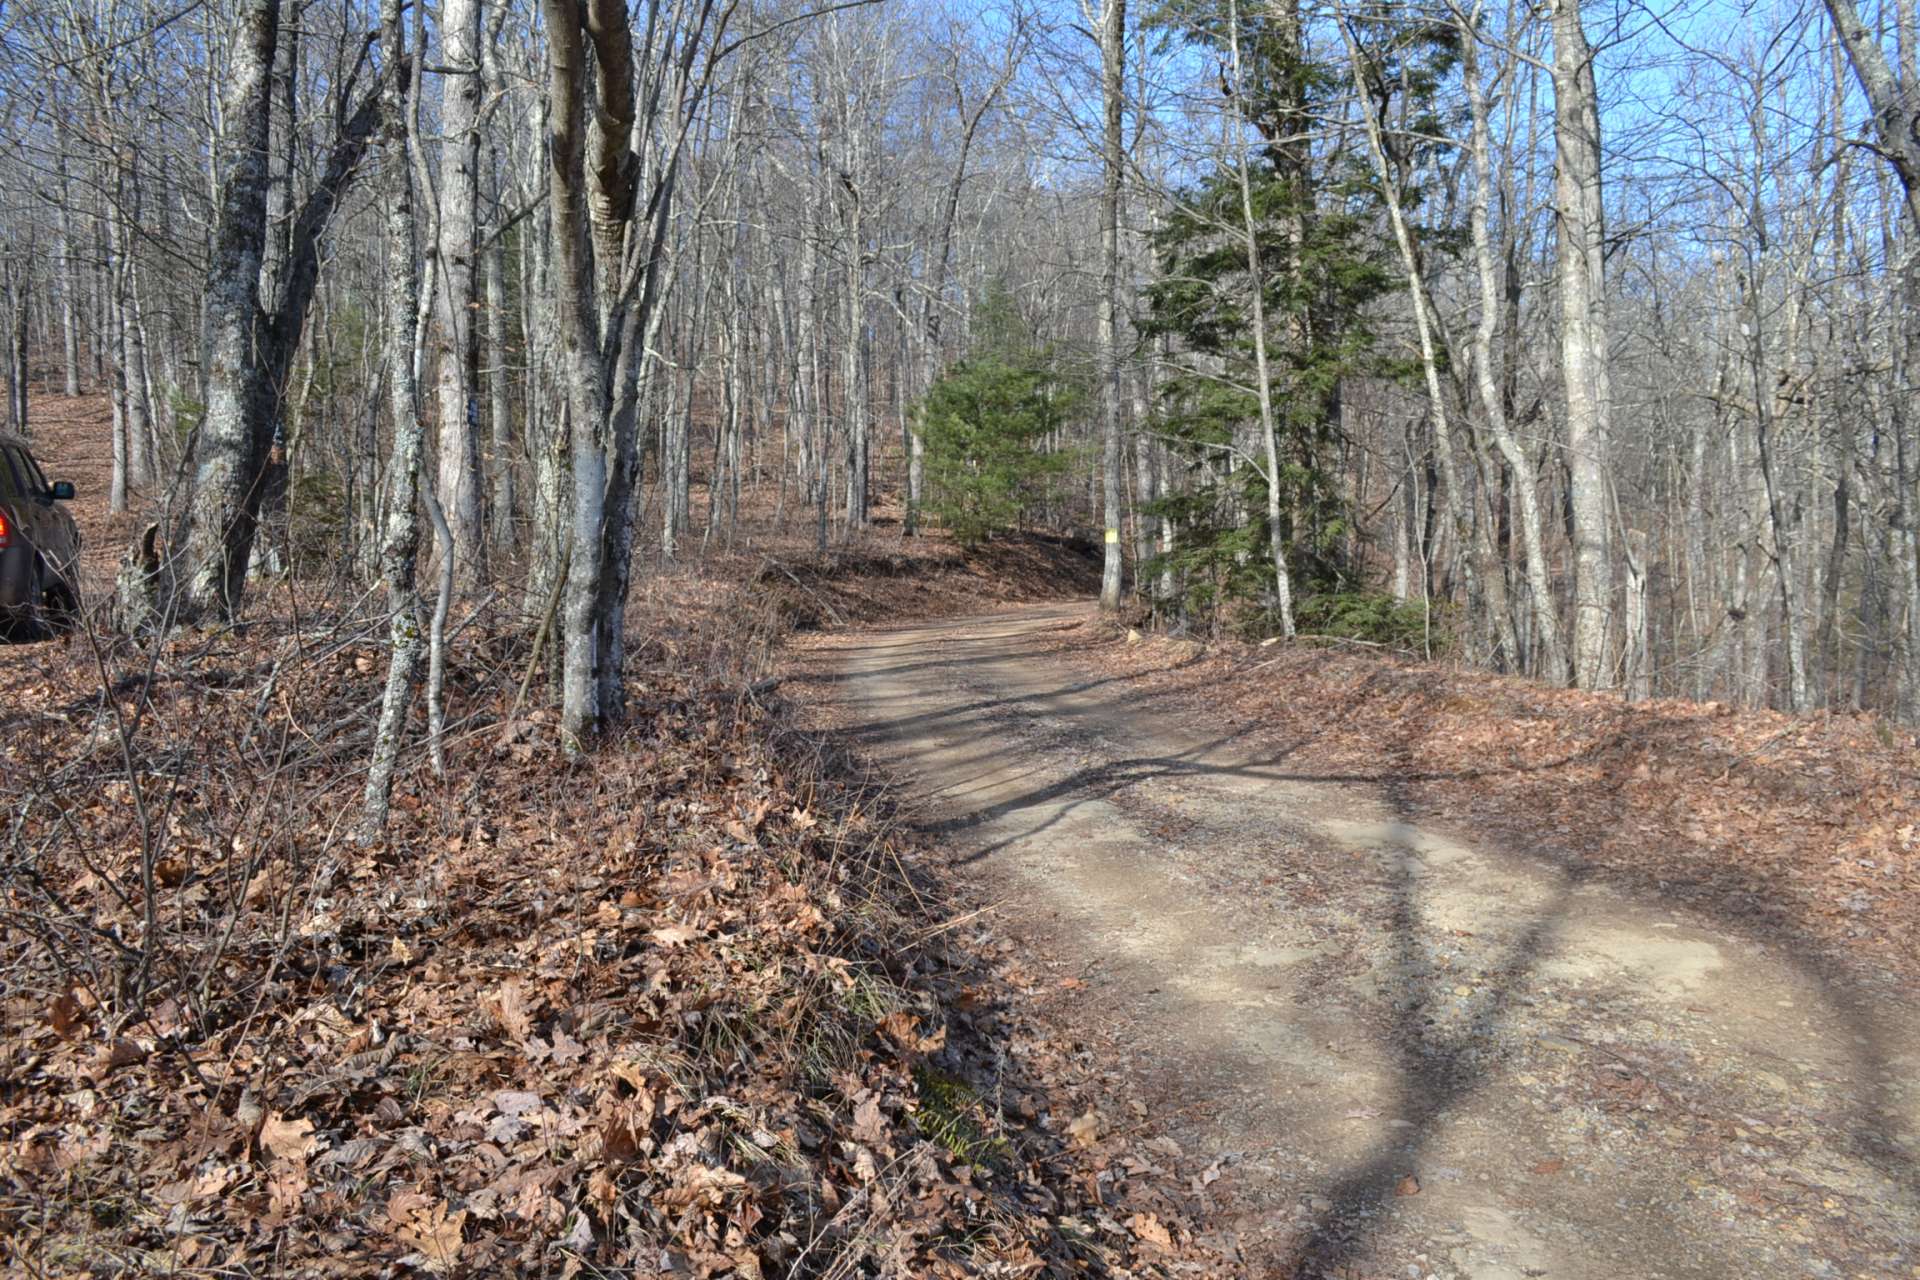 The property is located on Panther Creek Road in the Flatridge Community, Troutdale, VA. This photo is of Panther Creek Road to the right of entrance to property.